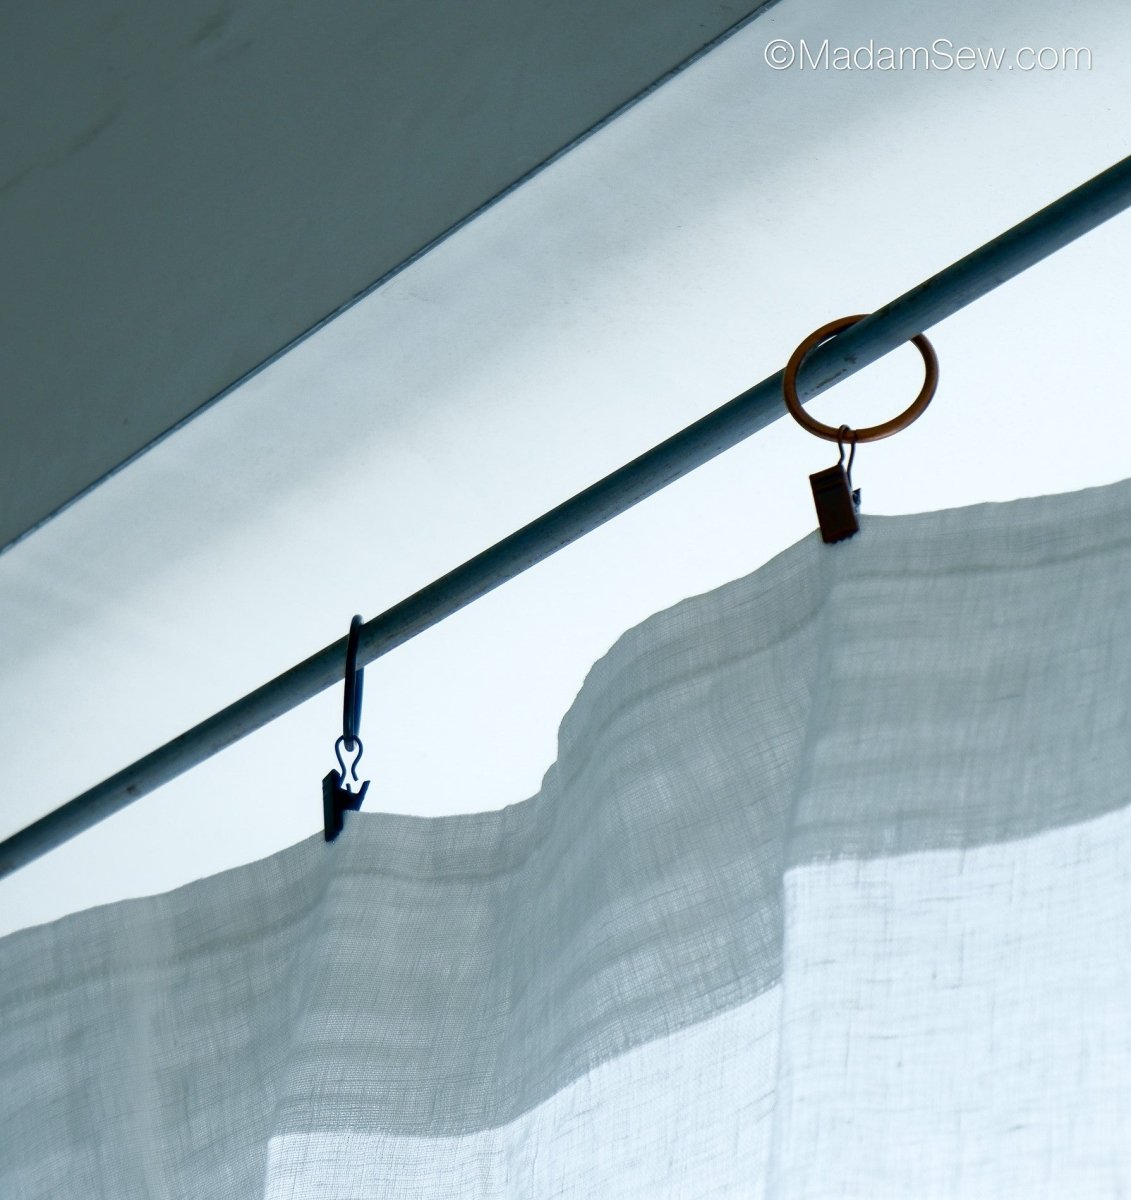 Metal Curtain & Quilt Hangers for a white lightweight curtain